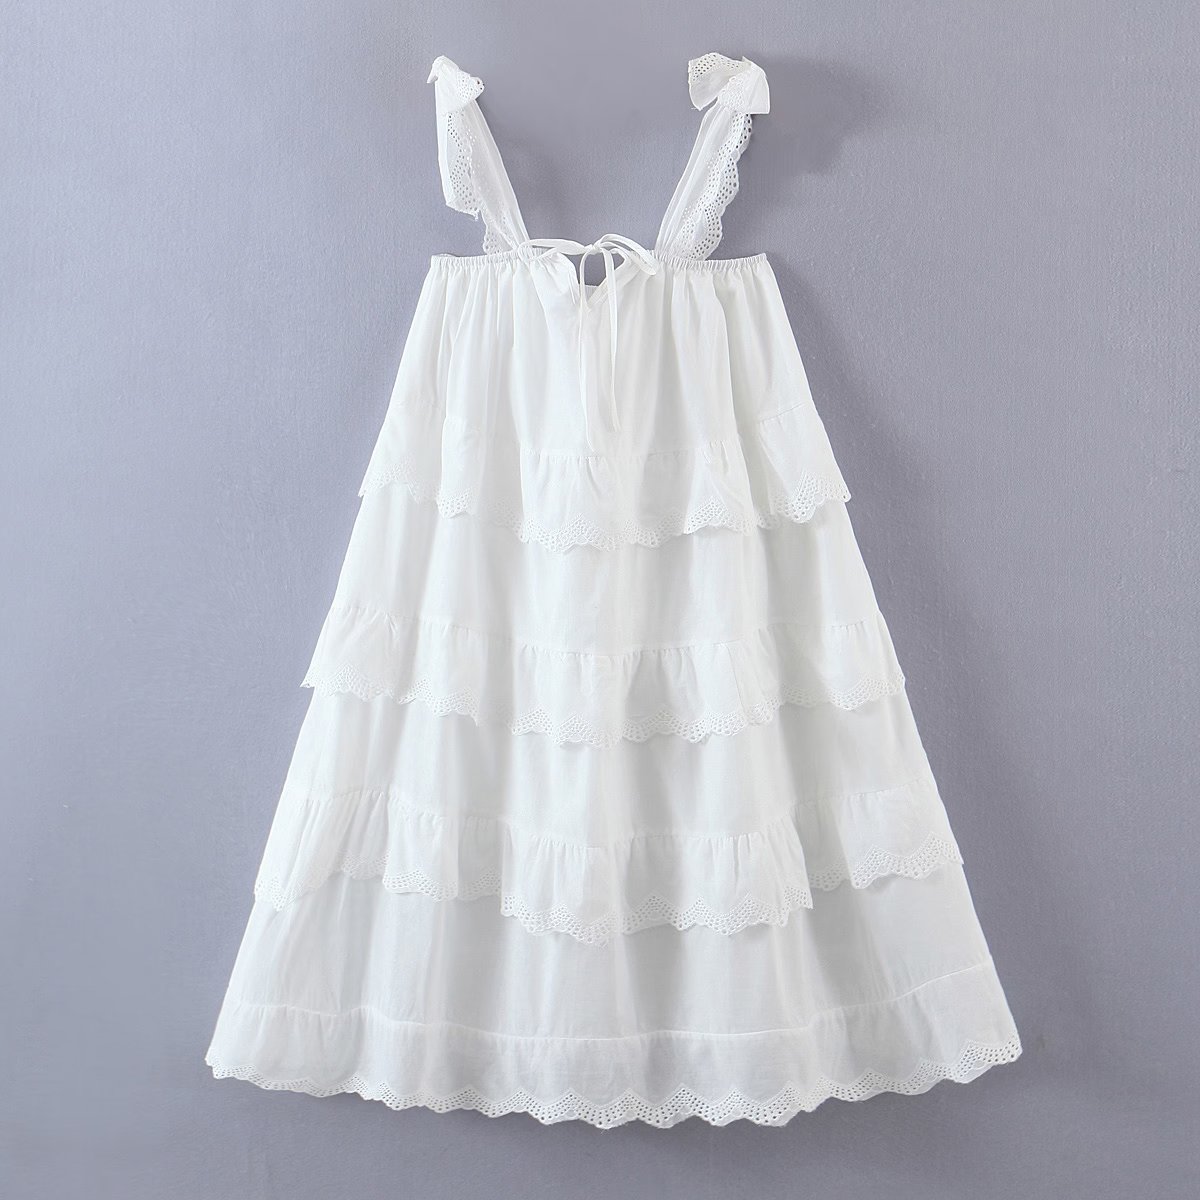 French Layered Lace Tiered Dress - Dresses - Uniqistic.com